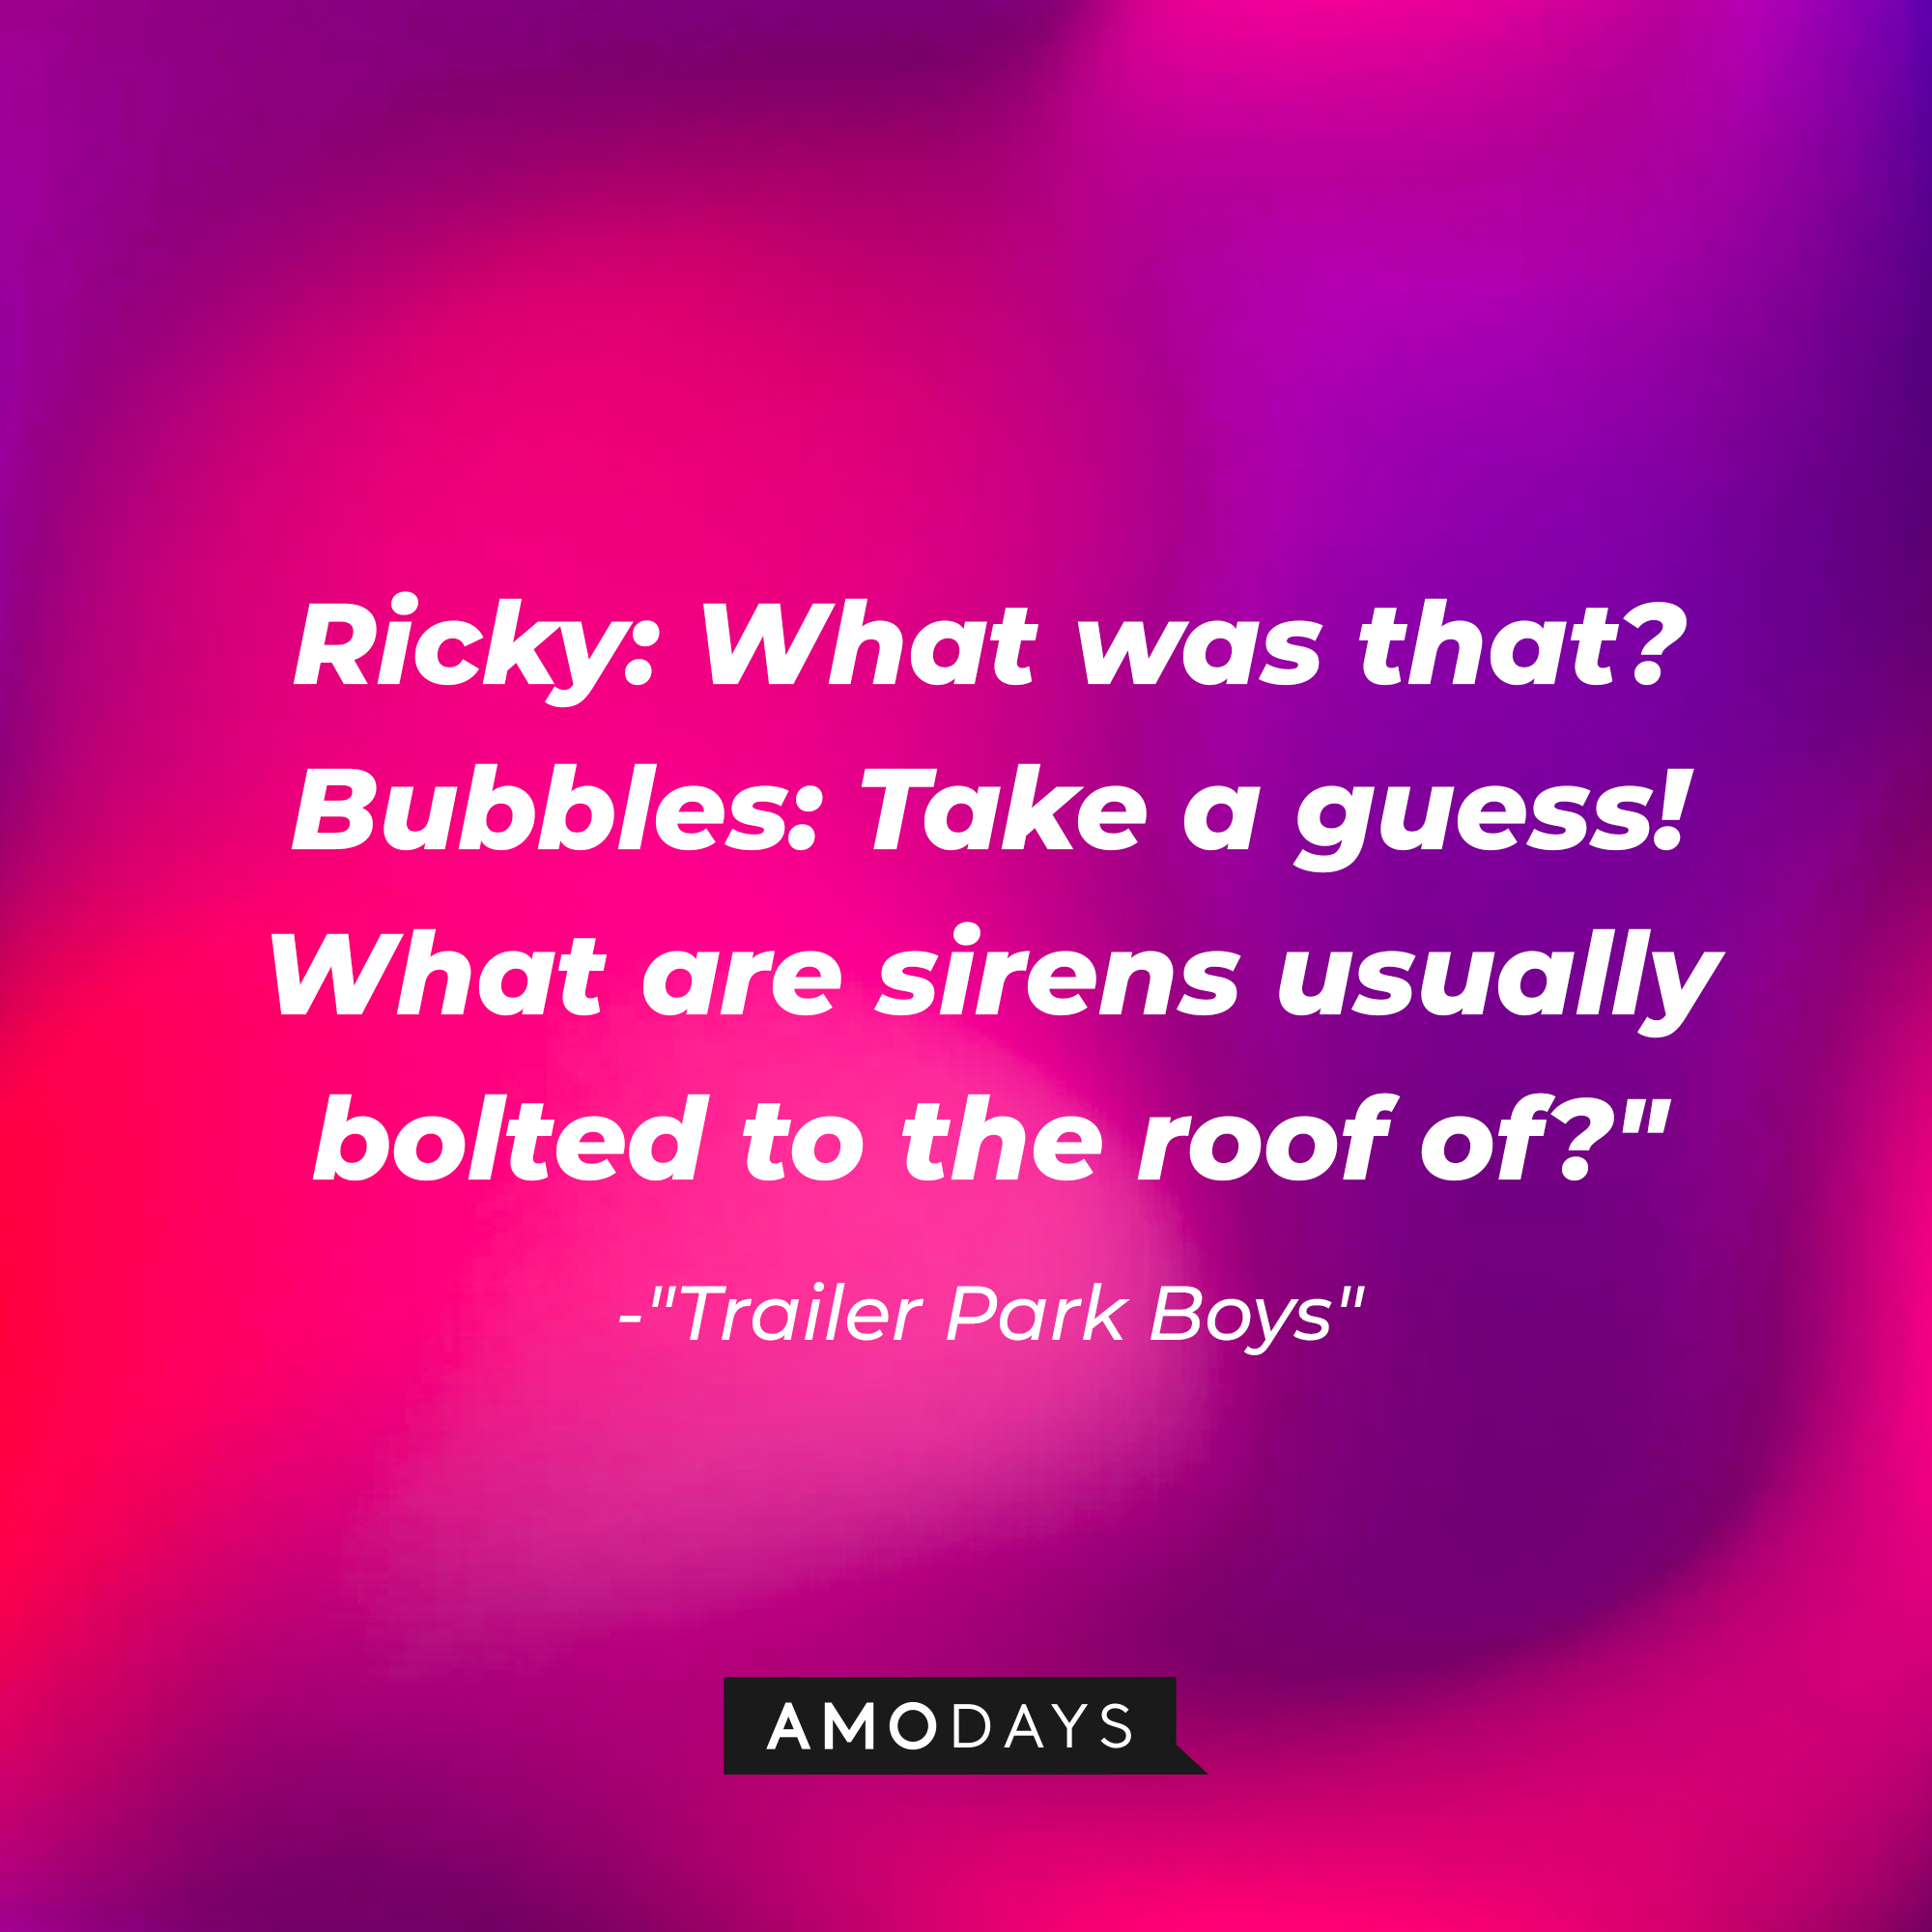 "Trailer Park Boys" quote, "Ricky: What was that? Bubbles: Take a guess! What are sirens usually bolted to the roof of?" | Source: AmoDays